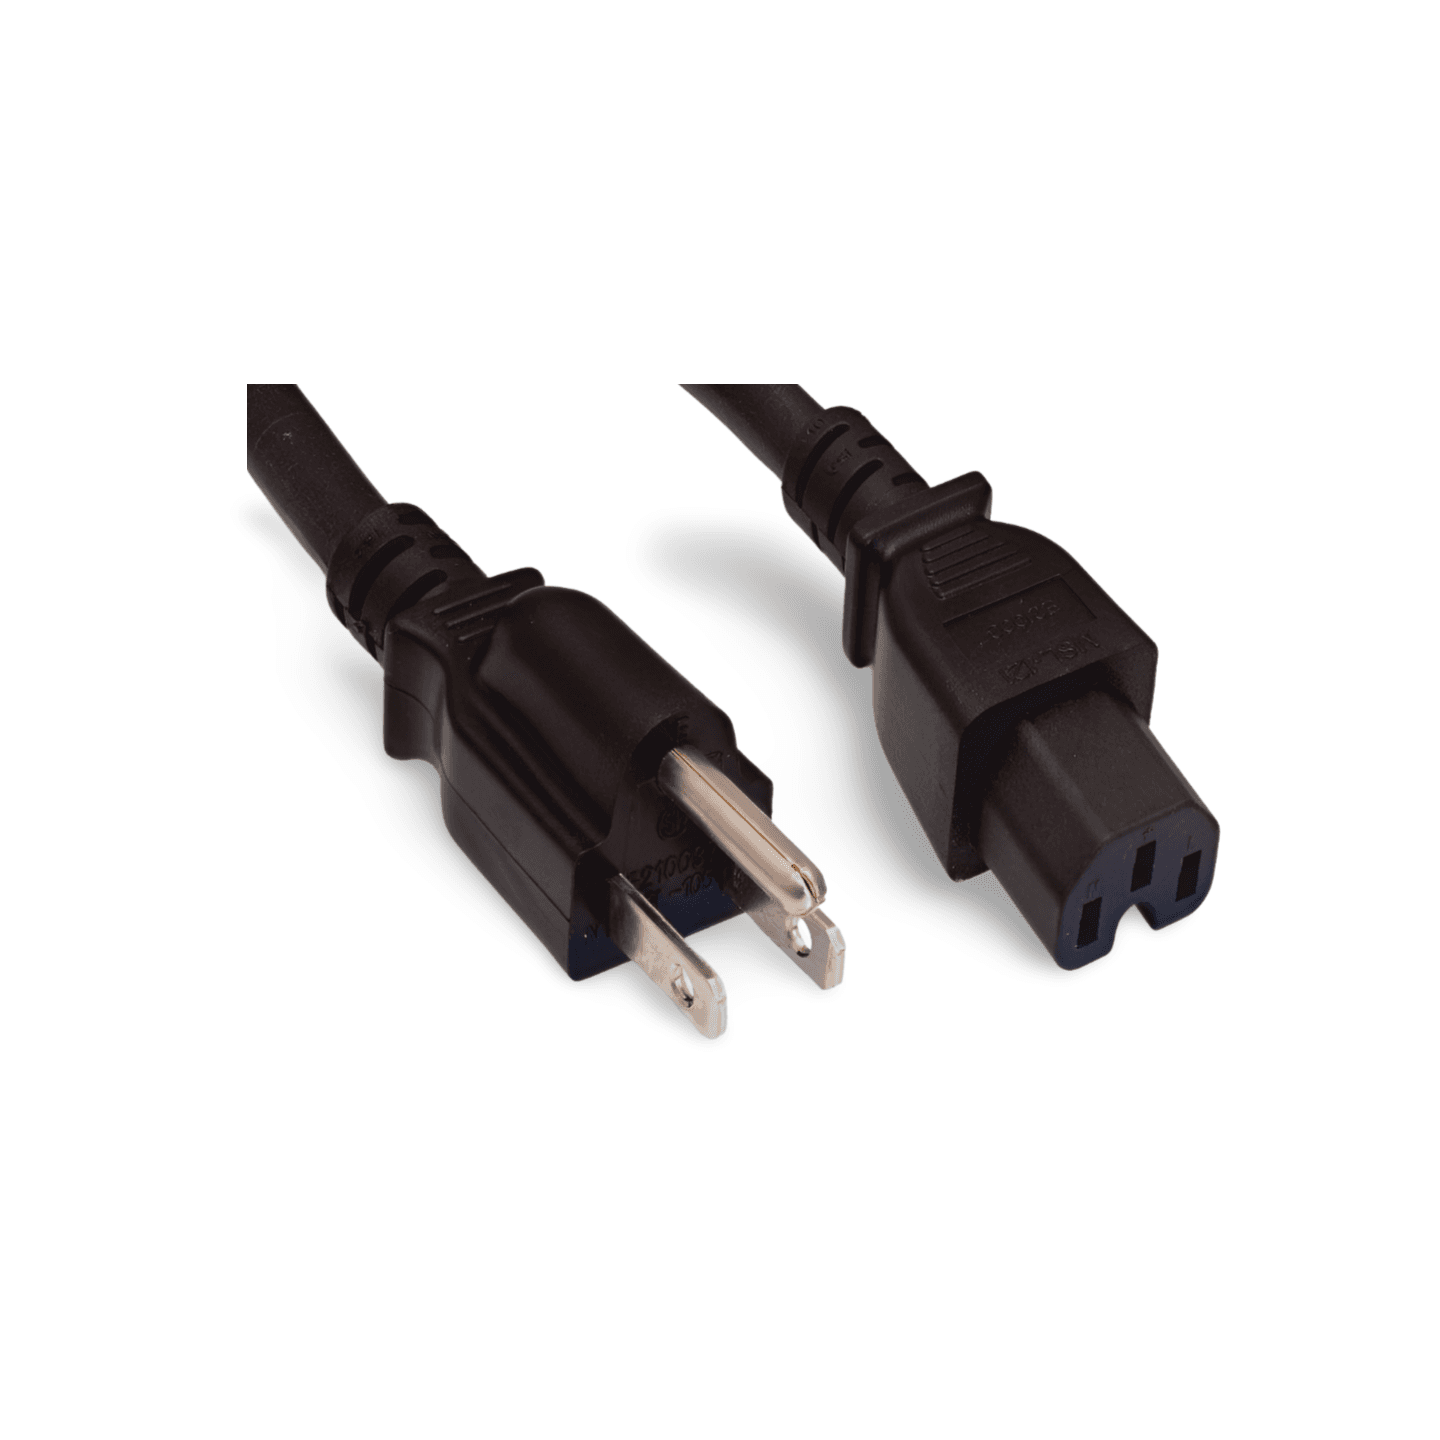 8ft Power Cable 5 15P to C15 black